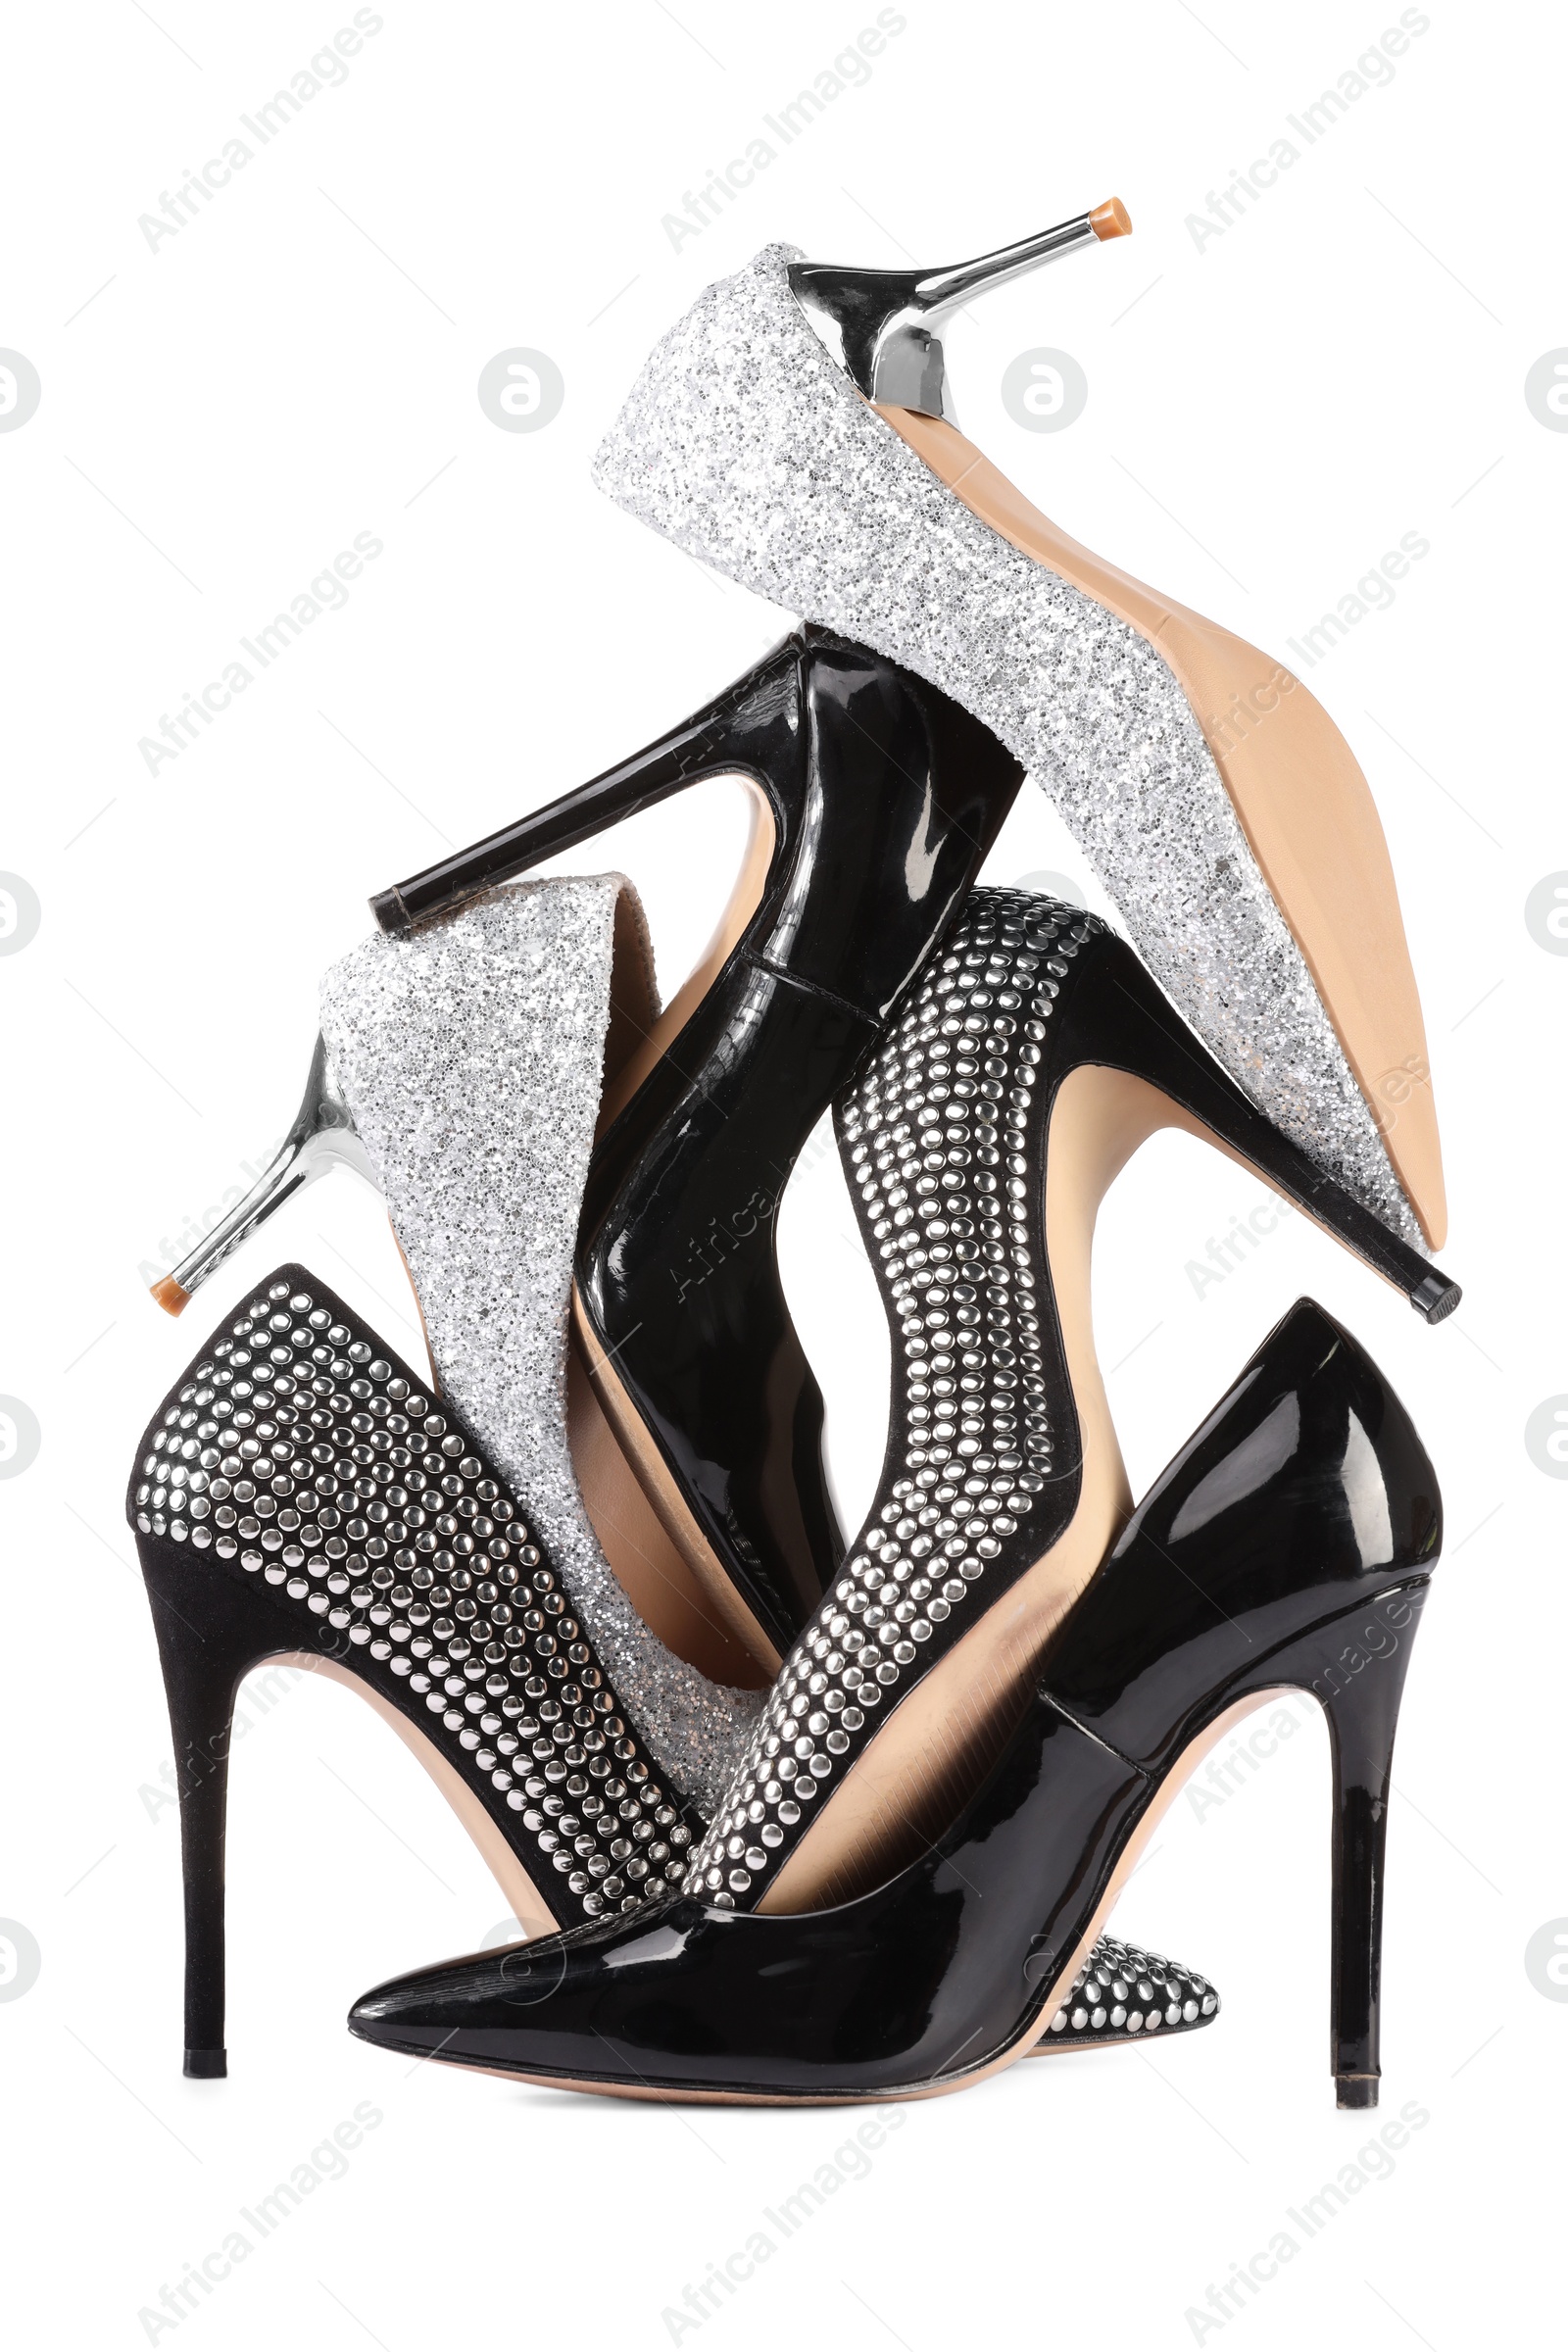 Photo of Pile of different high heels isolated on white